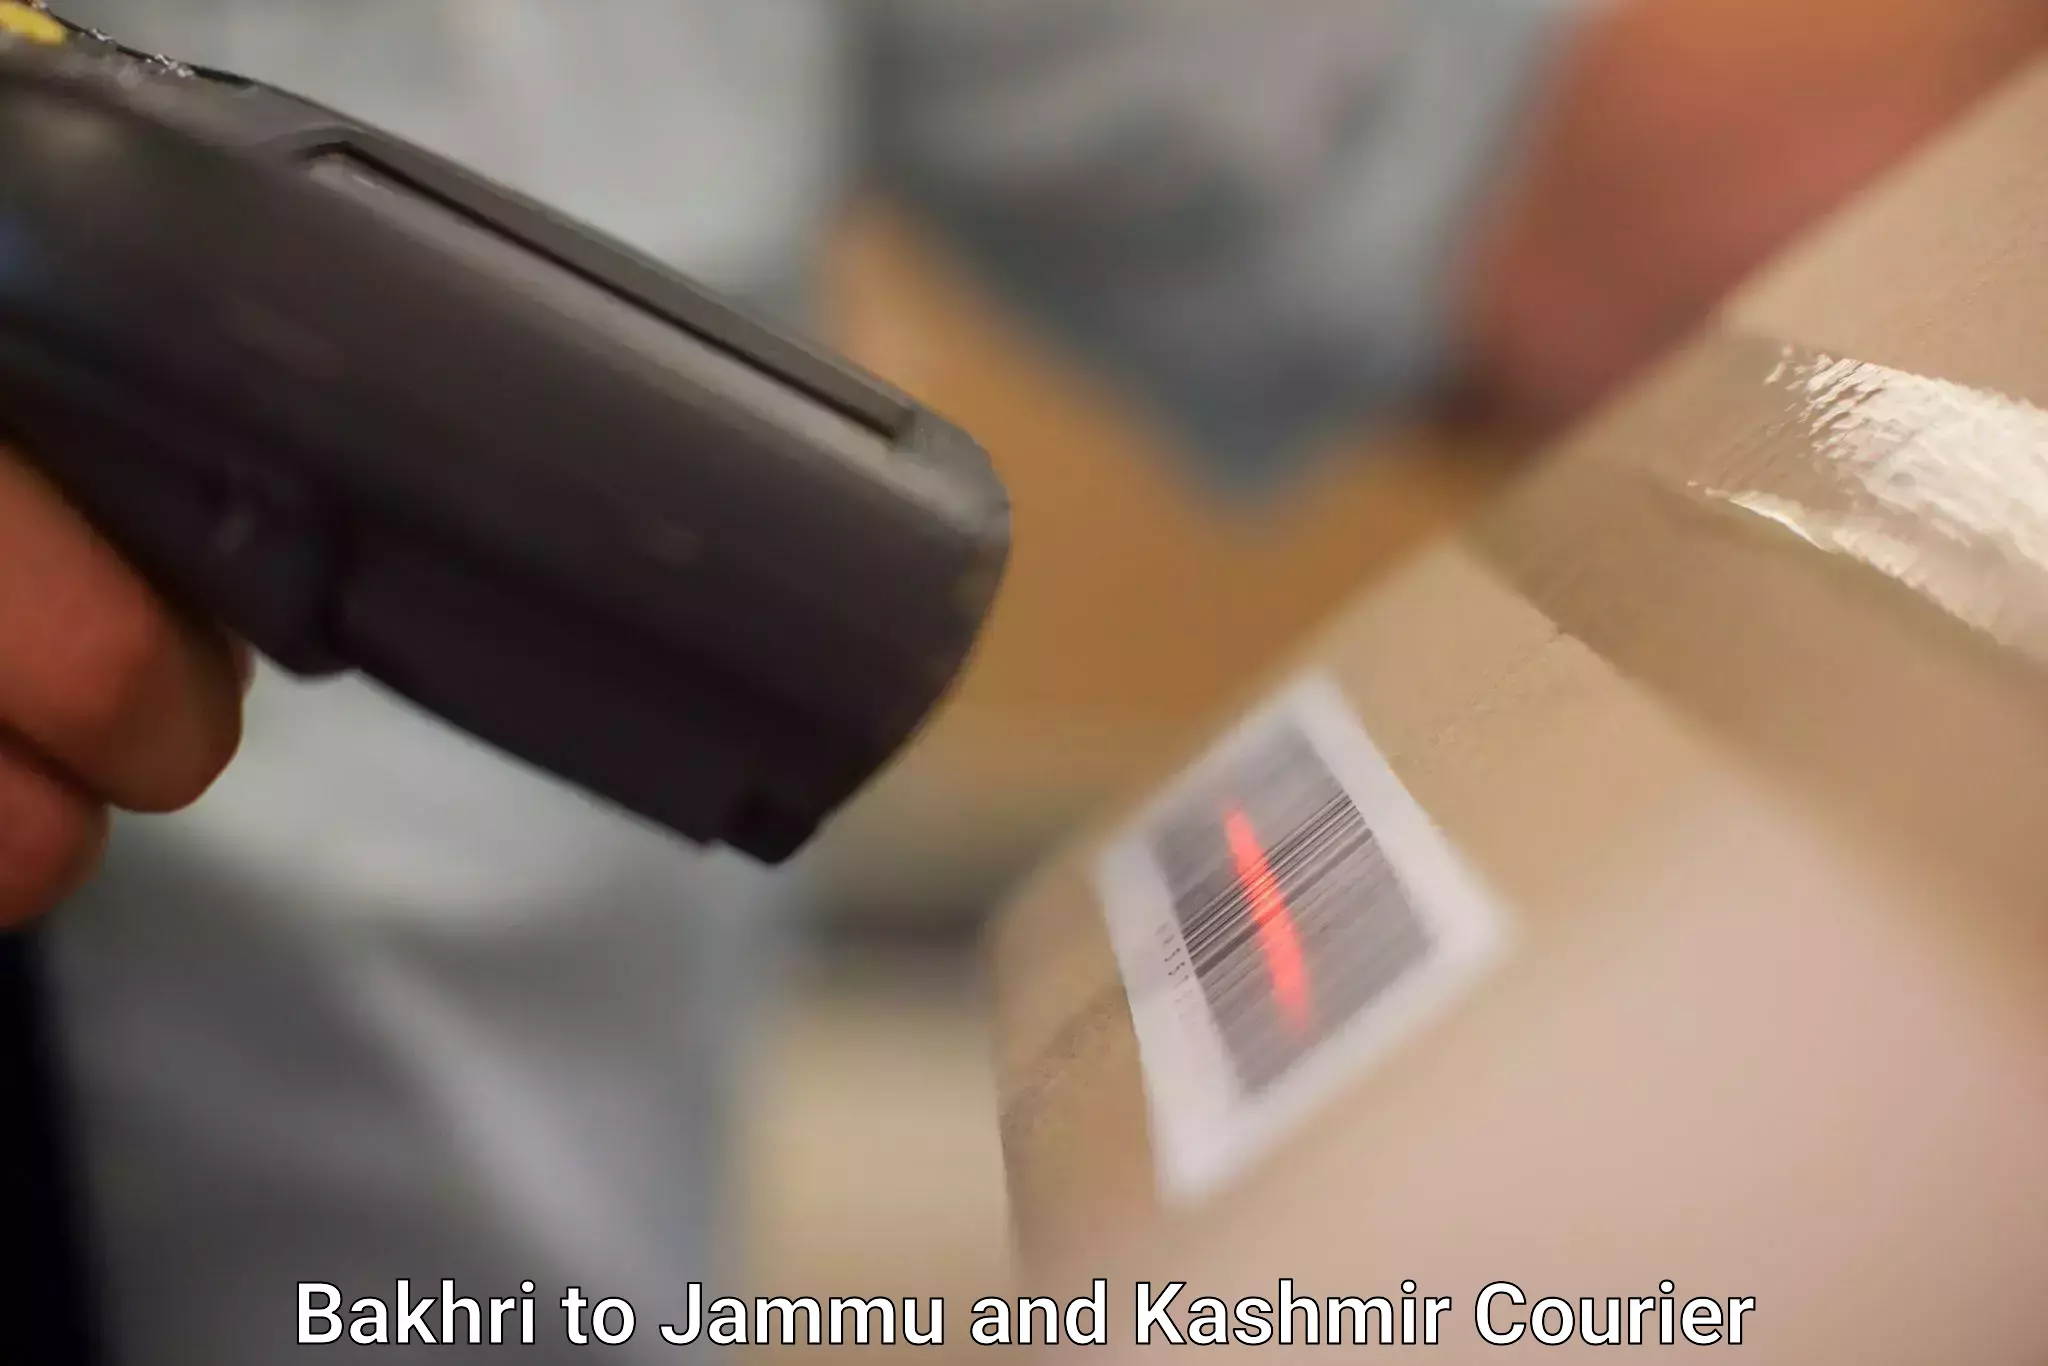 Courier service innovation Bakhri to Udhampur